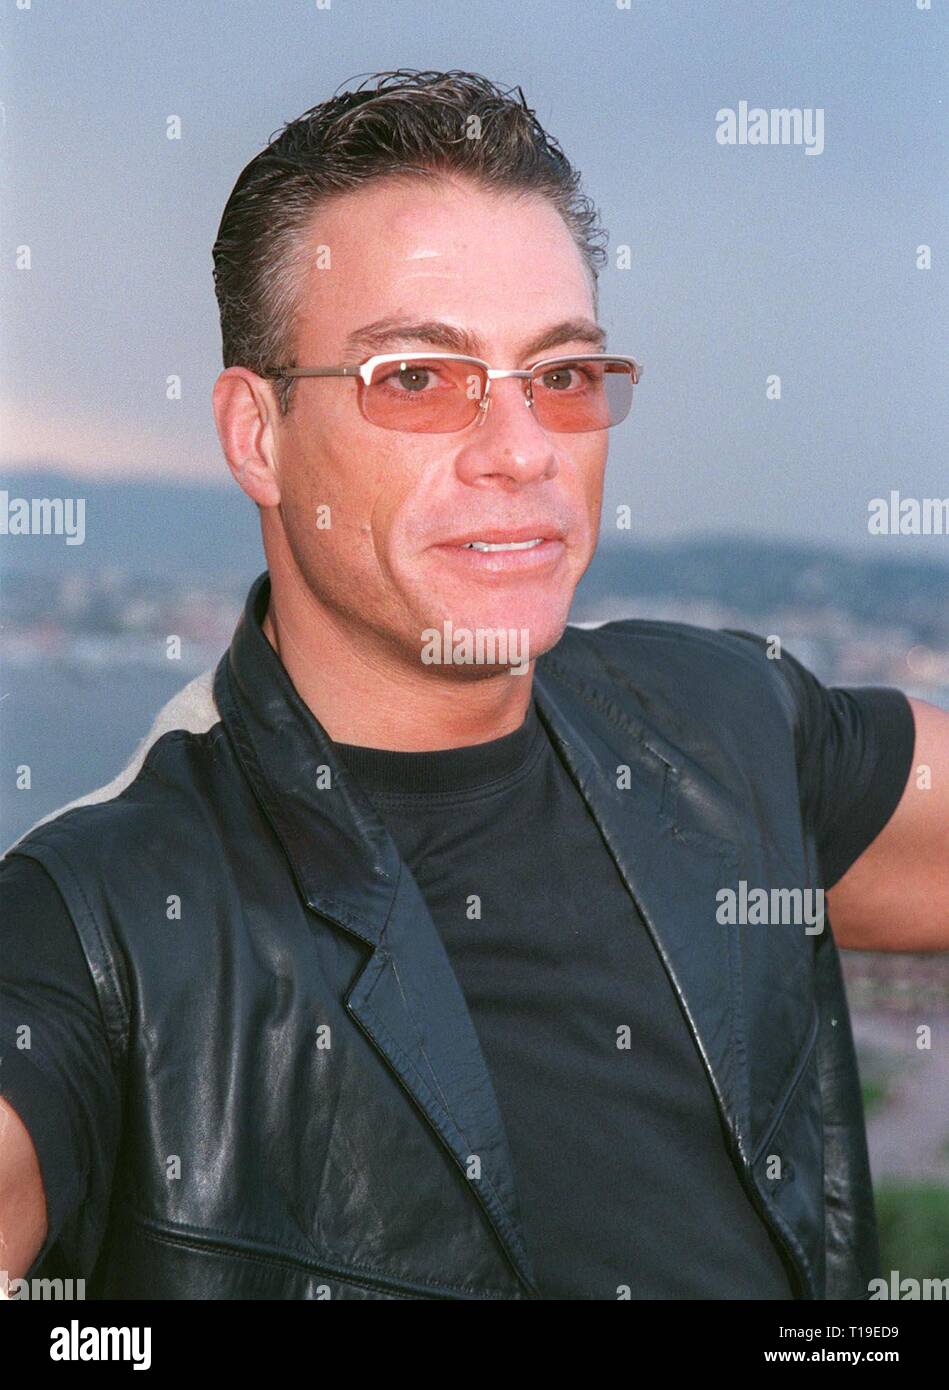 CANNES, FRANCE - May 19, 1998: Actor JEAN-CLAUDE VAN DAMME at the Cannes  Film Festival Stock Photo - Alamy